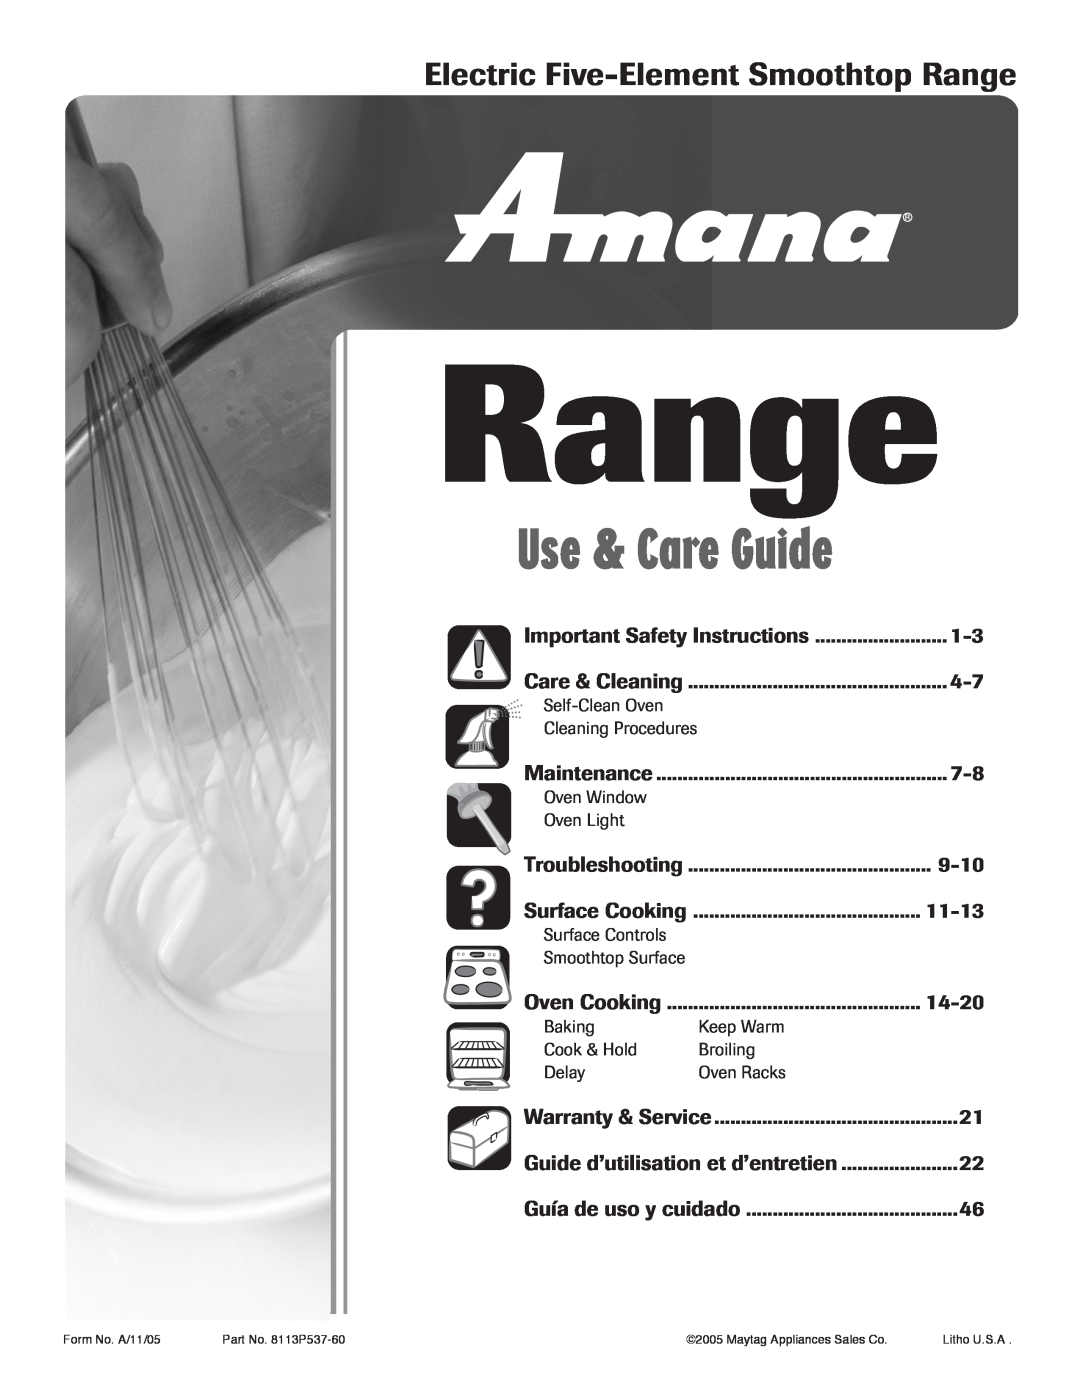 Amana Electric Smoothtop Range important safety instructions Electric Five-ElementSmoothtop Range, Use & Care Guide 